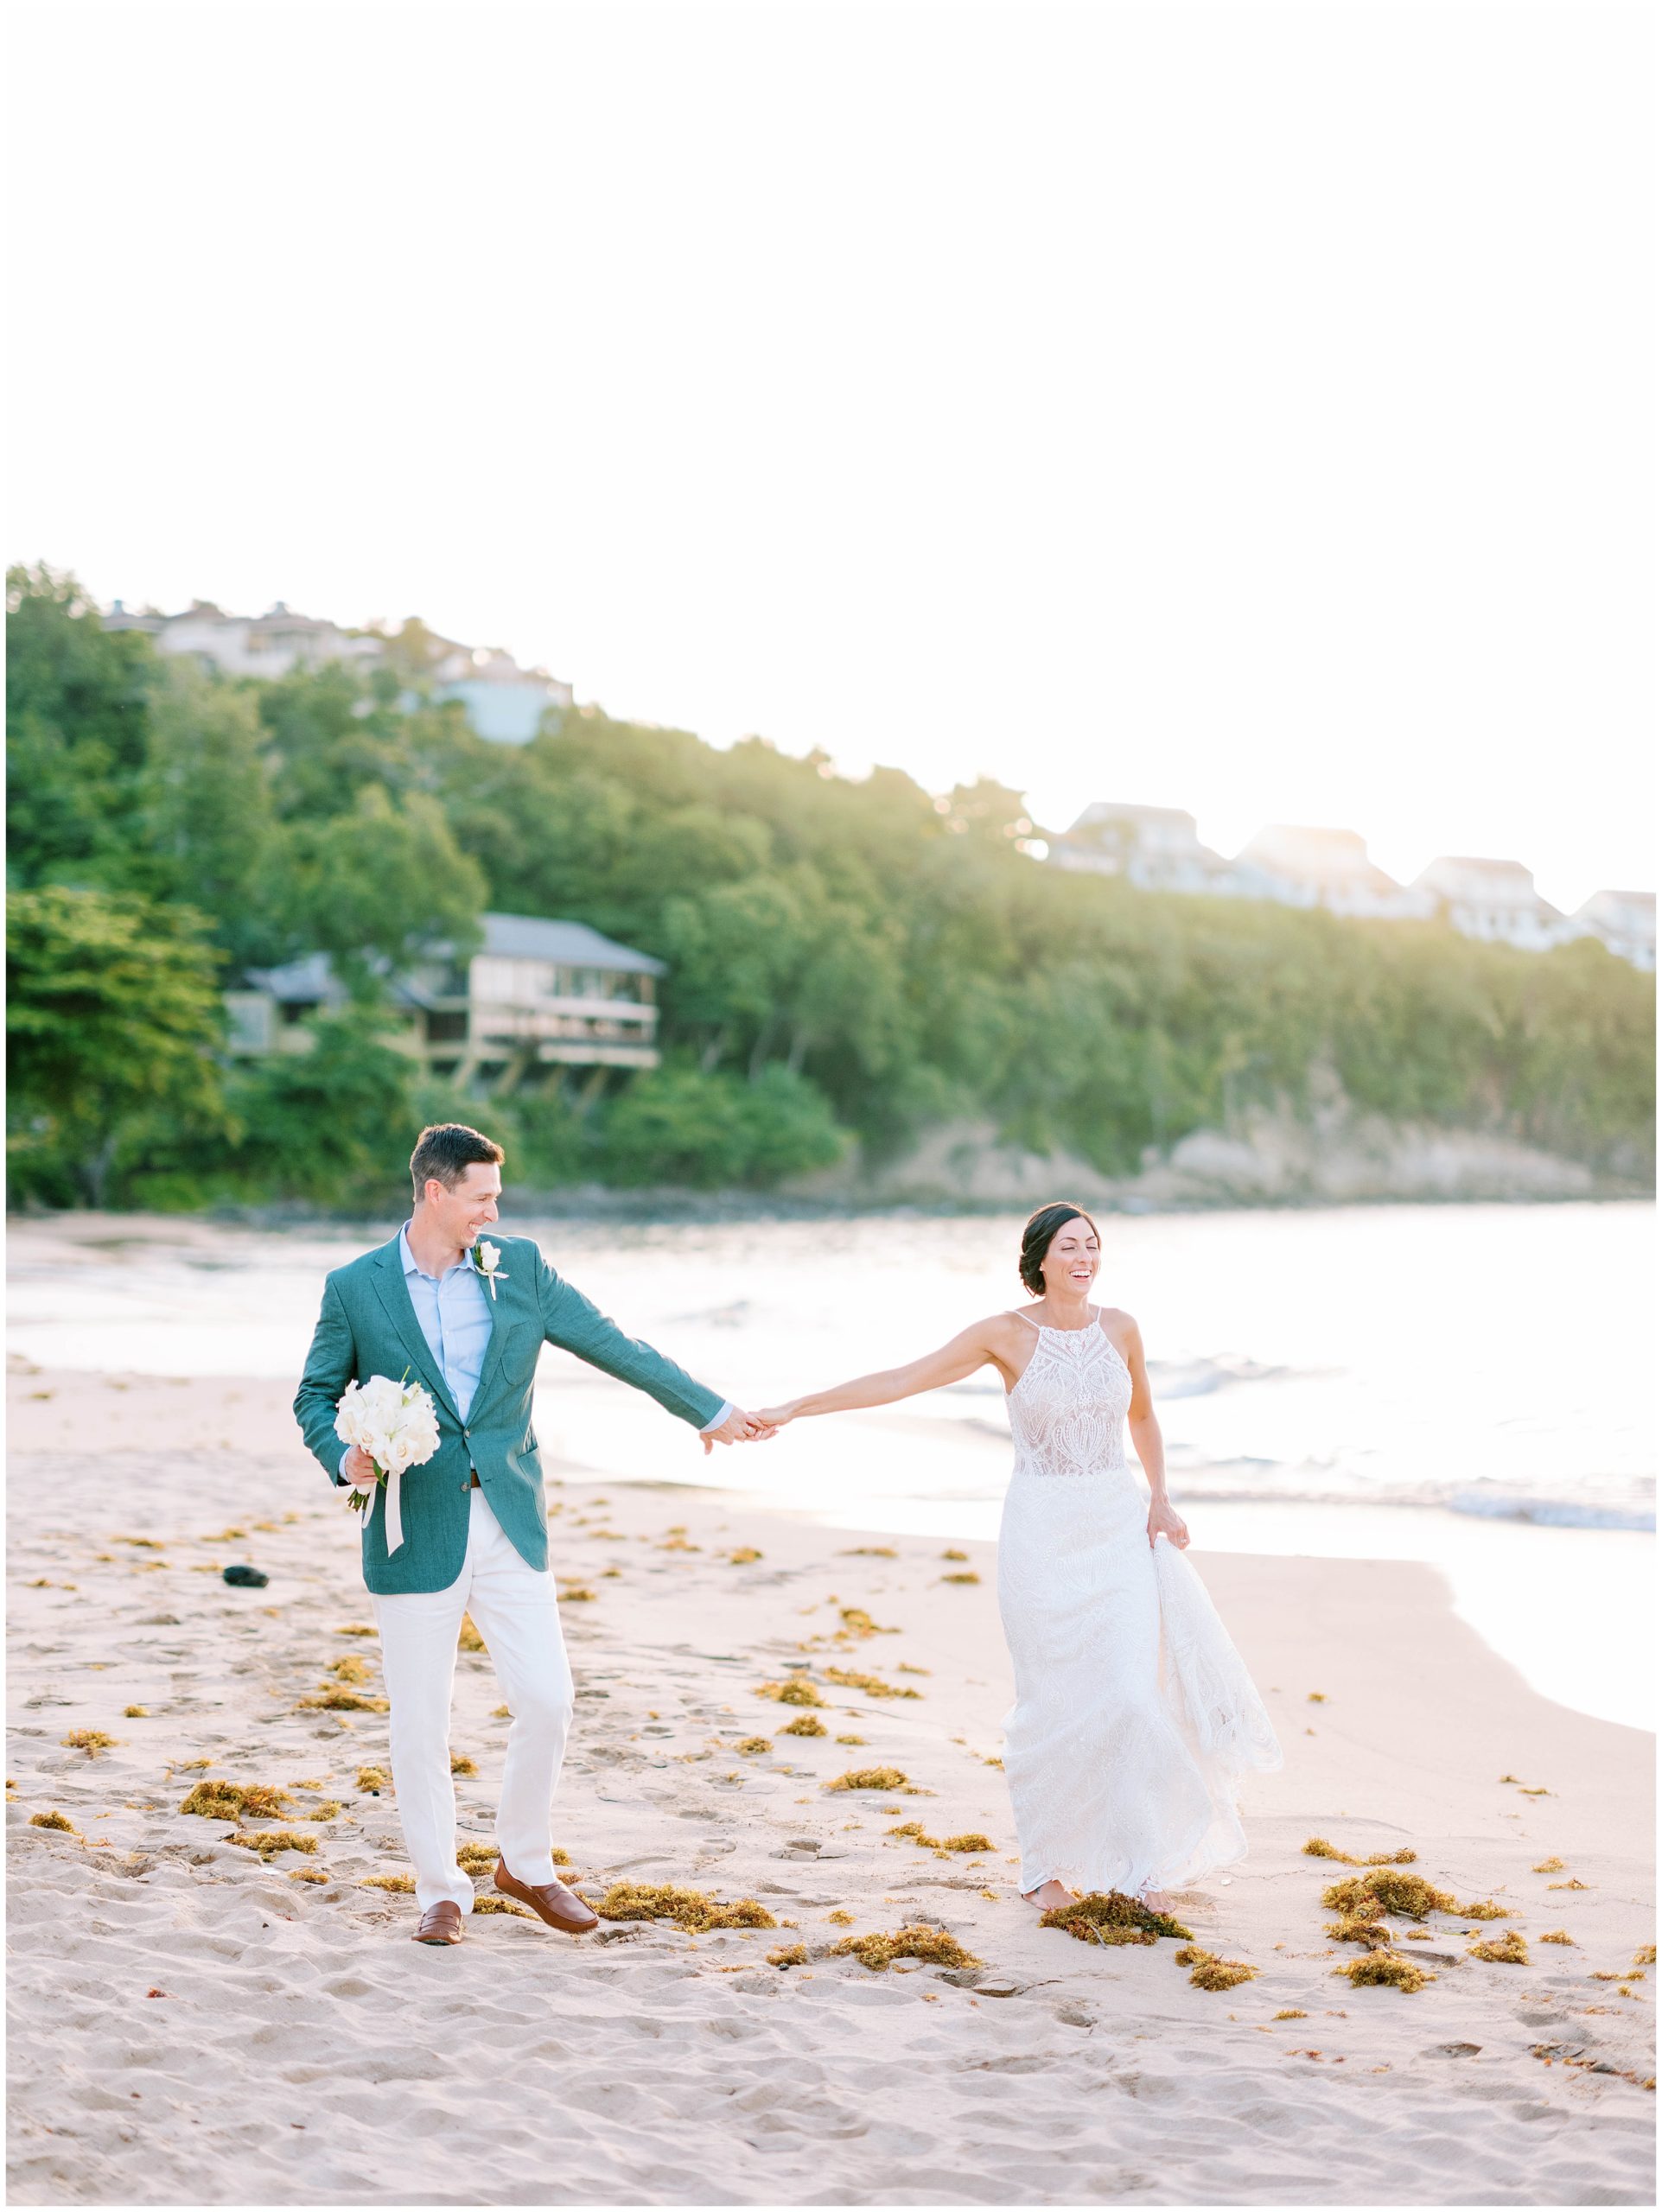 Raleigh, North Carolina couple travels to Saint Lucia for a Destination Wedding